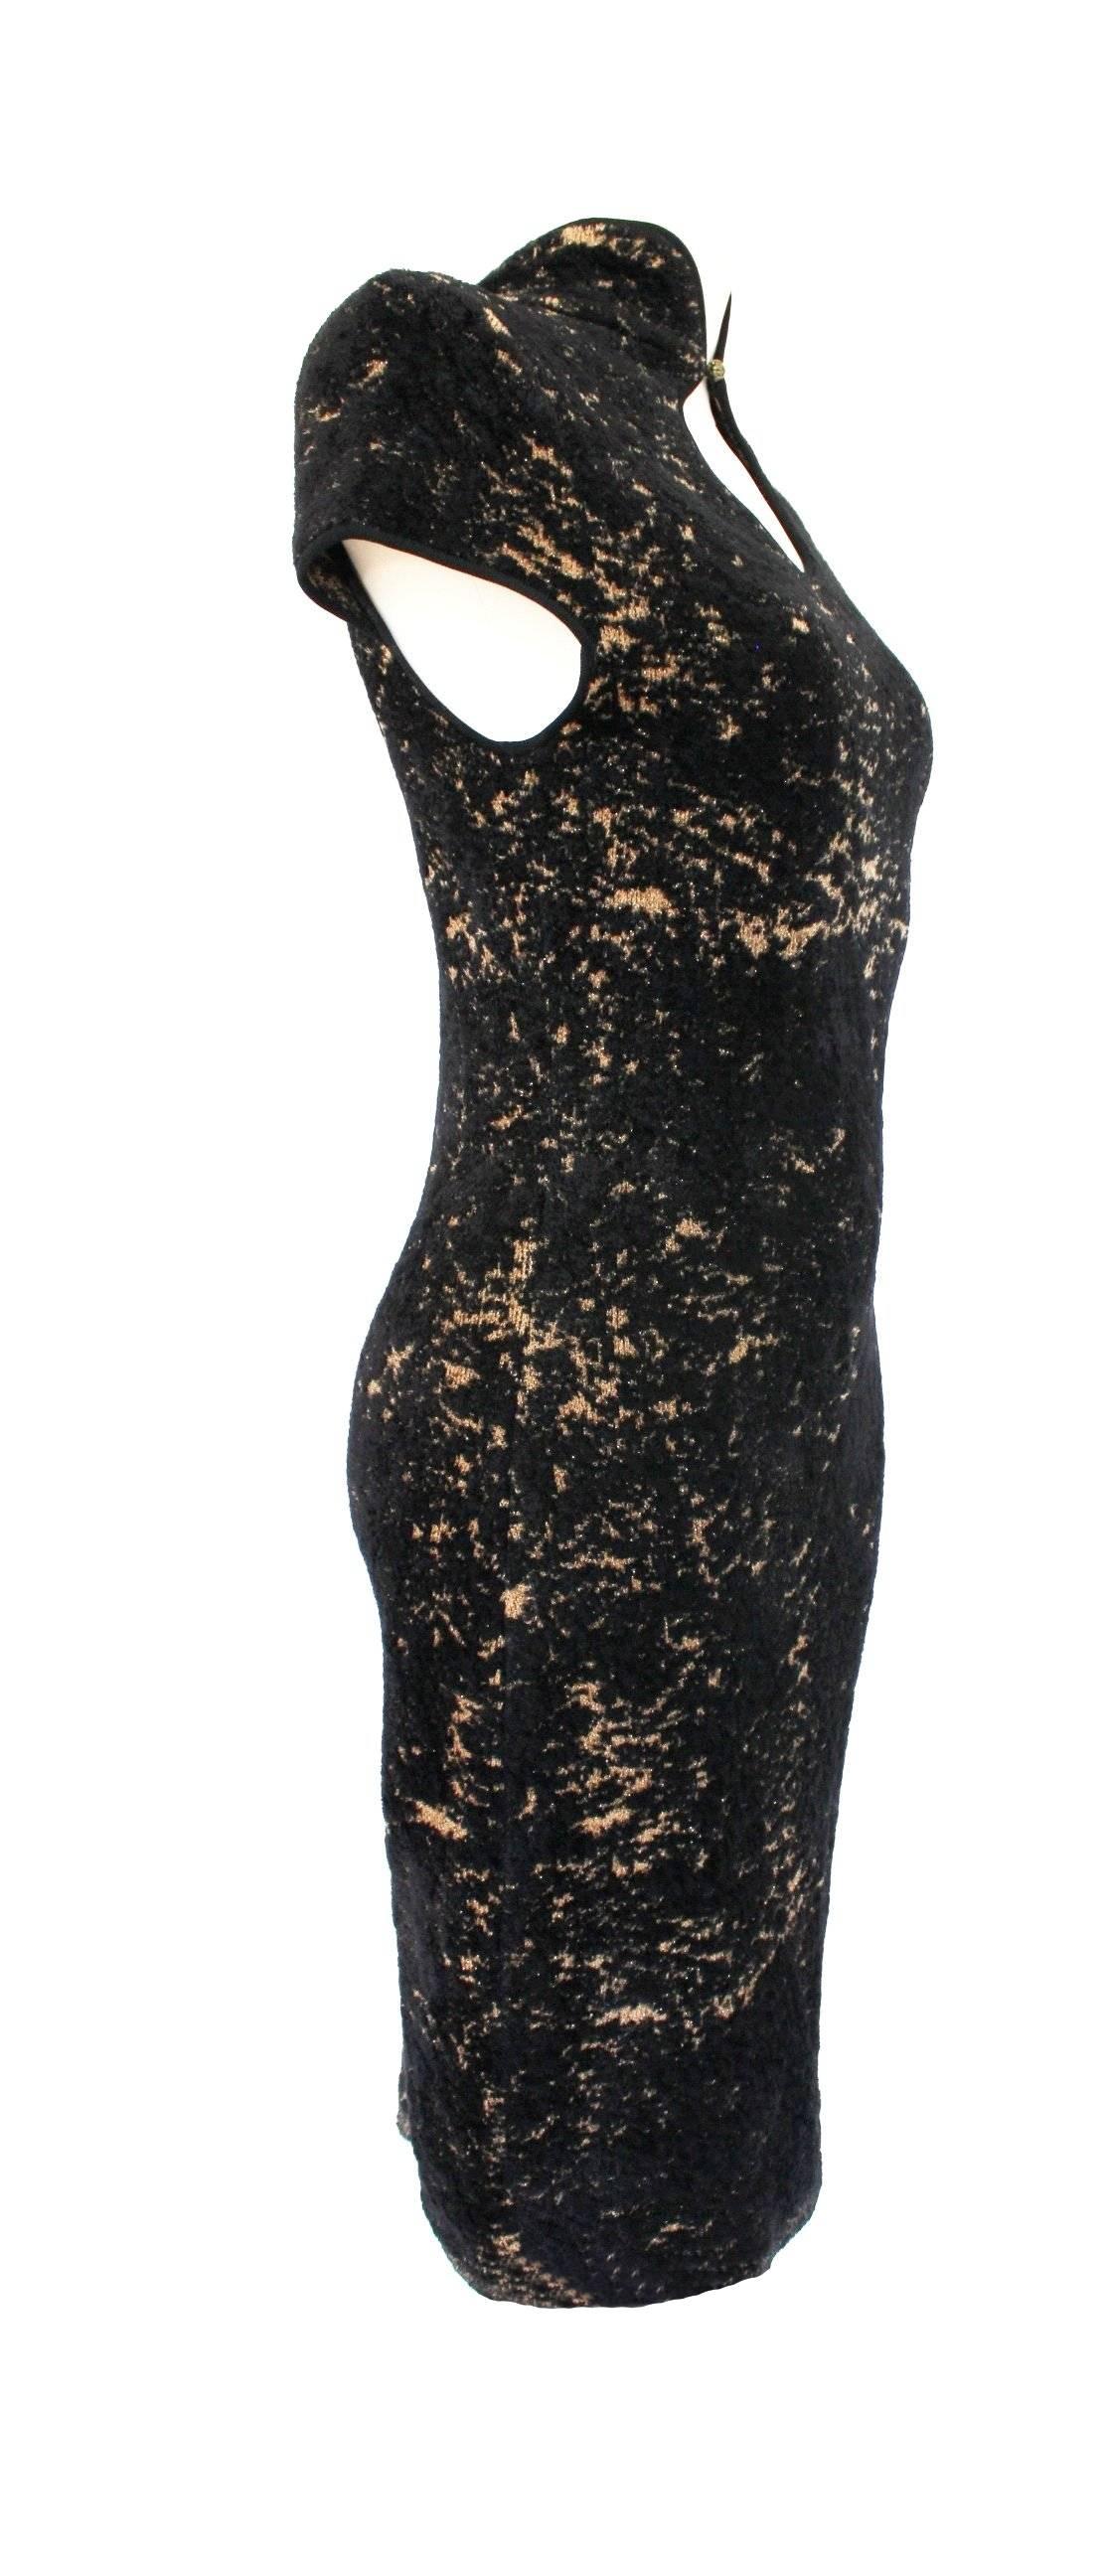 GORGEOUS 

BLACK CHANEL KNIT CHENILLE DRESS
 
INSPIRED BY THE CHINESE CHEONGSAM STYLE

WITH BEAUTIFUL COLLAR

A BEAUTIFUL TIMELESS CHANEL PIECE THAT WILL LAST YOU FOR YEARS

DETAILS:
CHANEL classic knit dress
Simply slips on
Beautiful